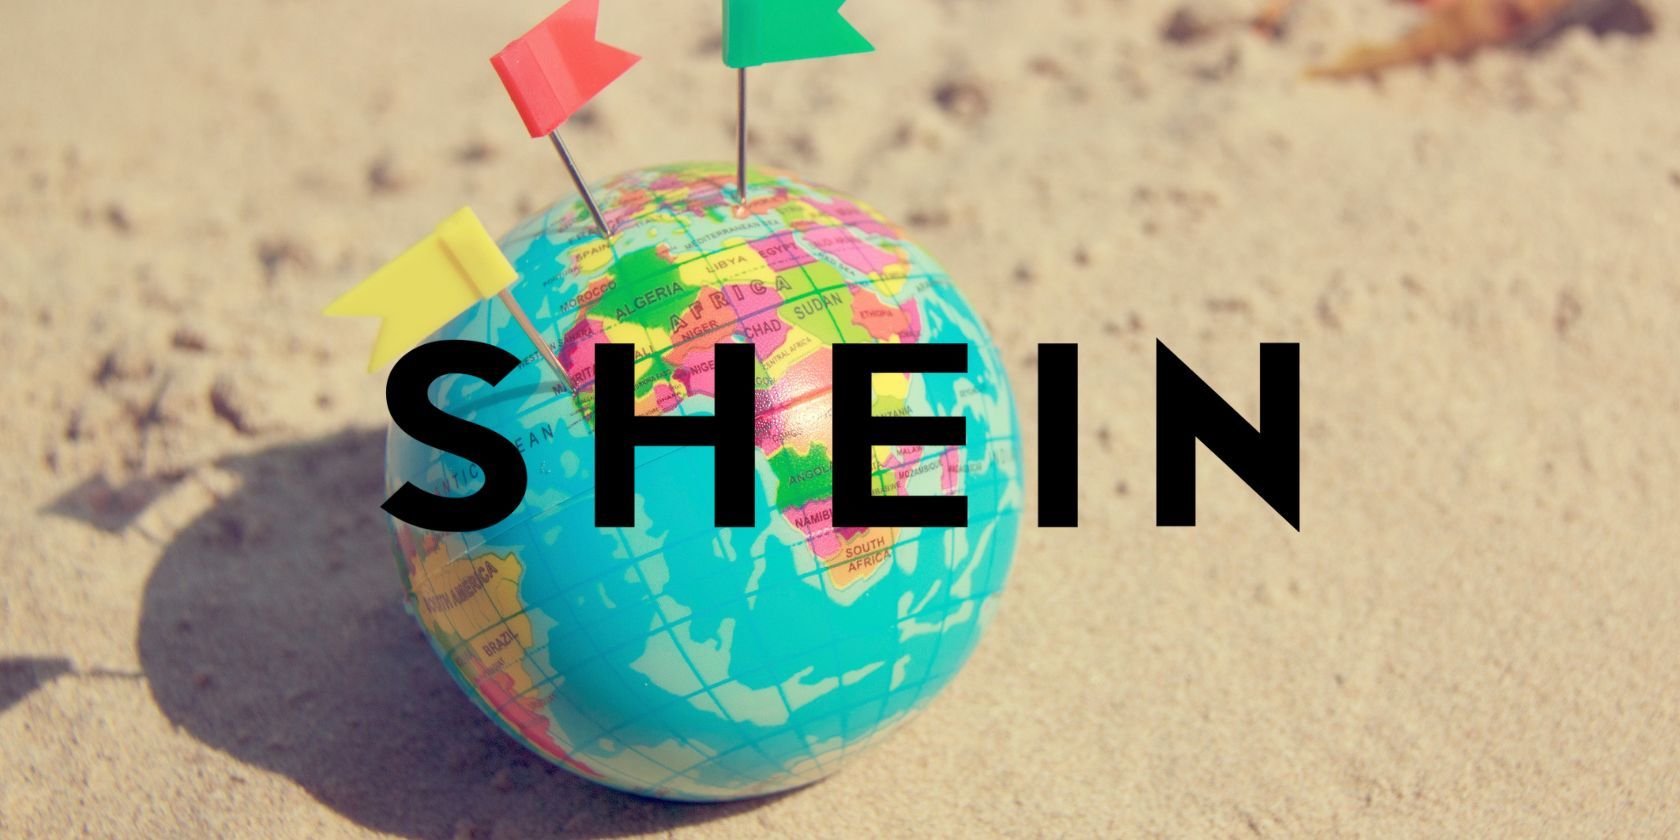 shein logo in front of small globe on sand